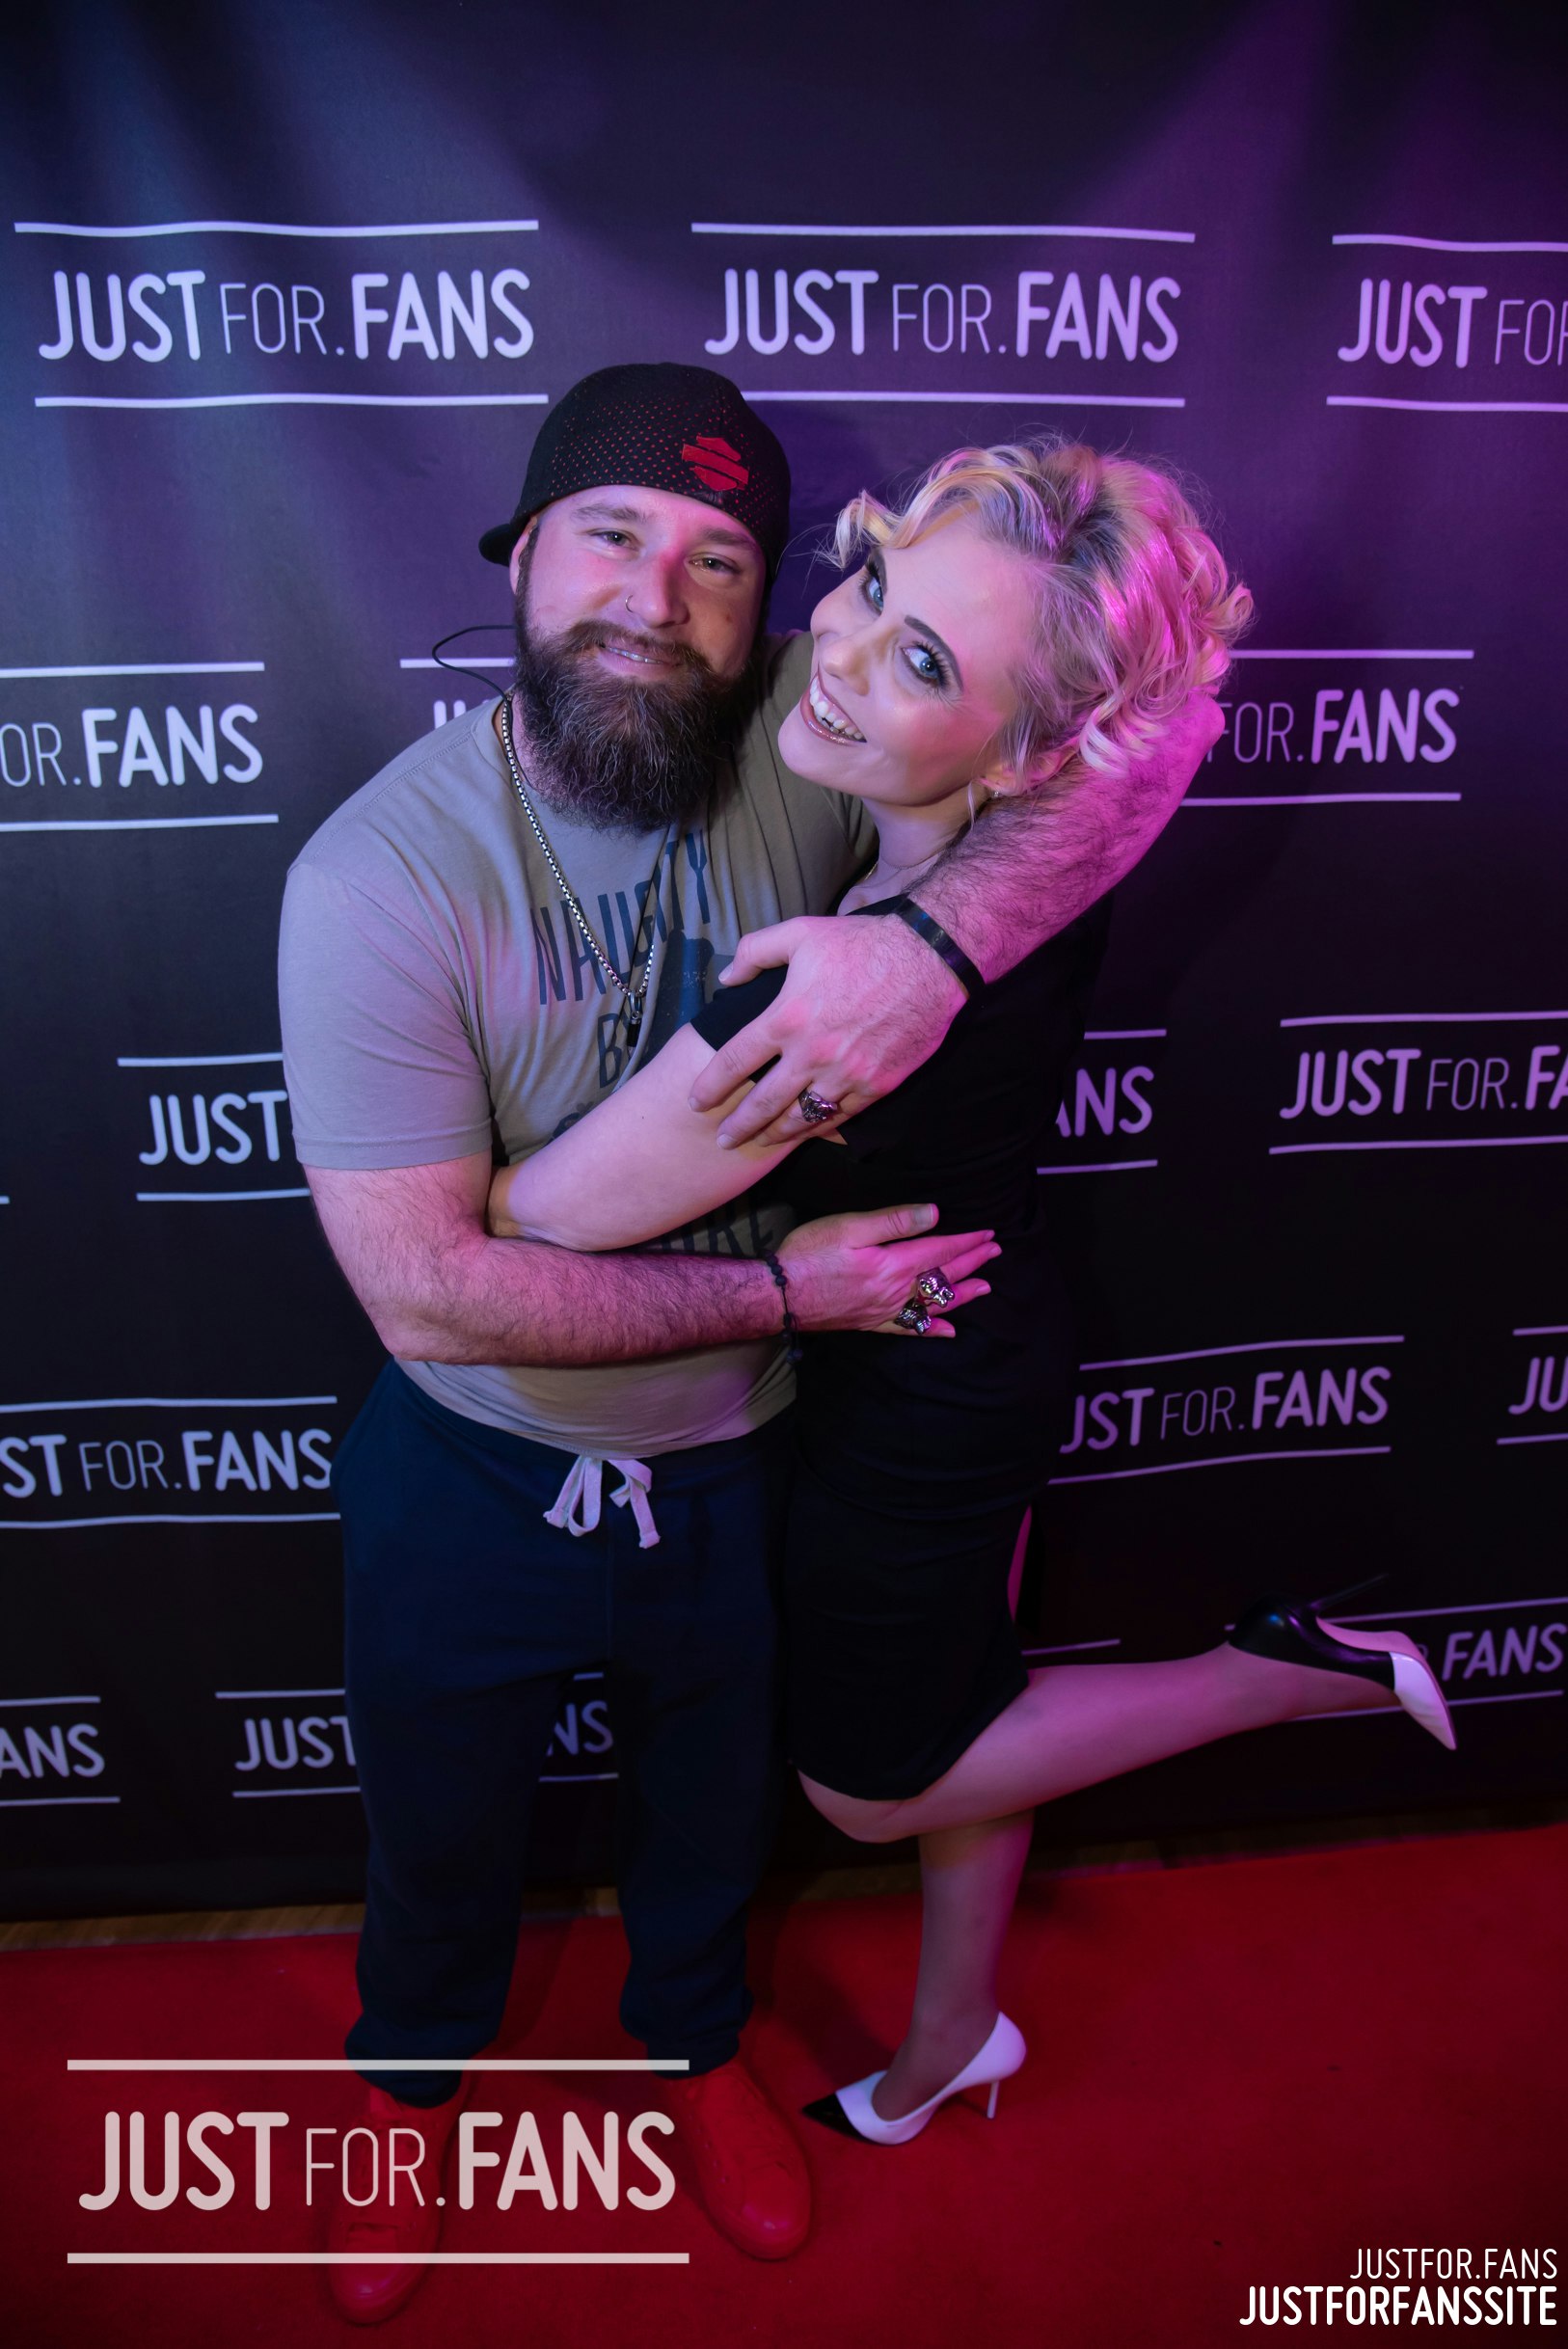 A photo showing two Justfor.fans models hugging on a red carpet